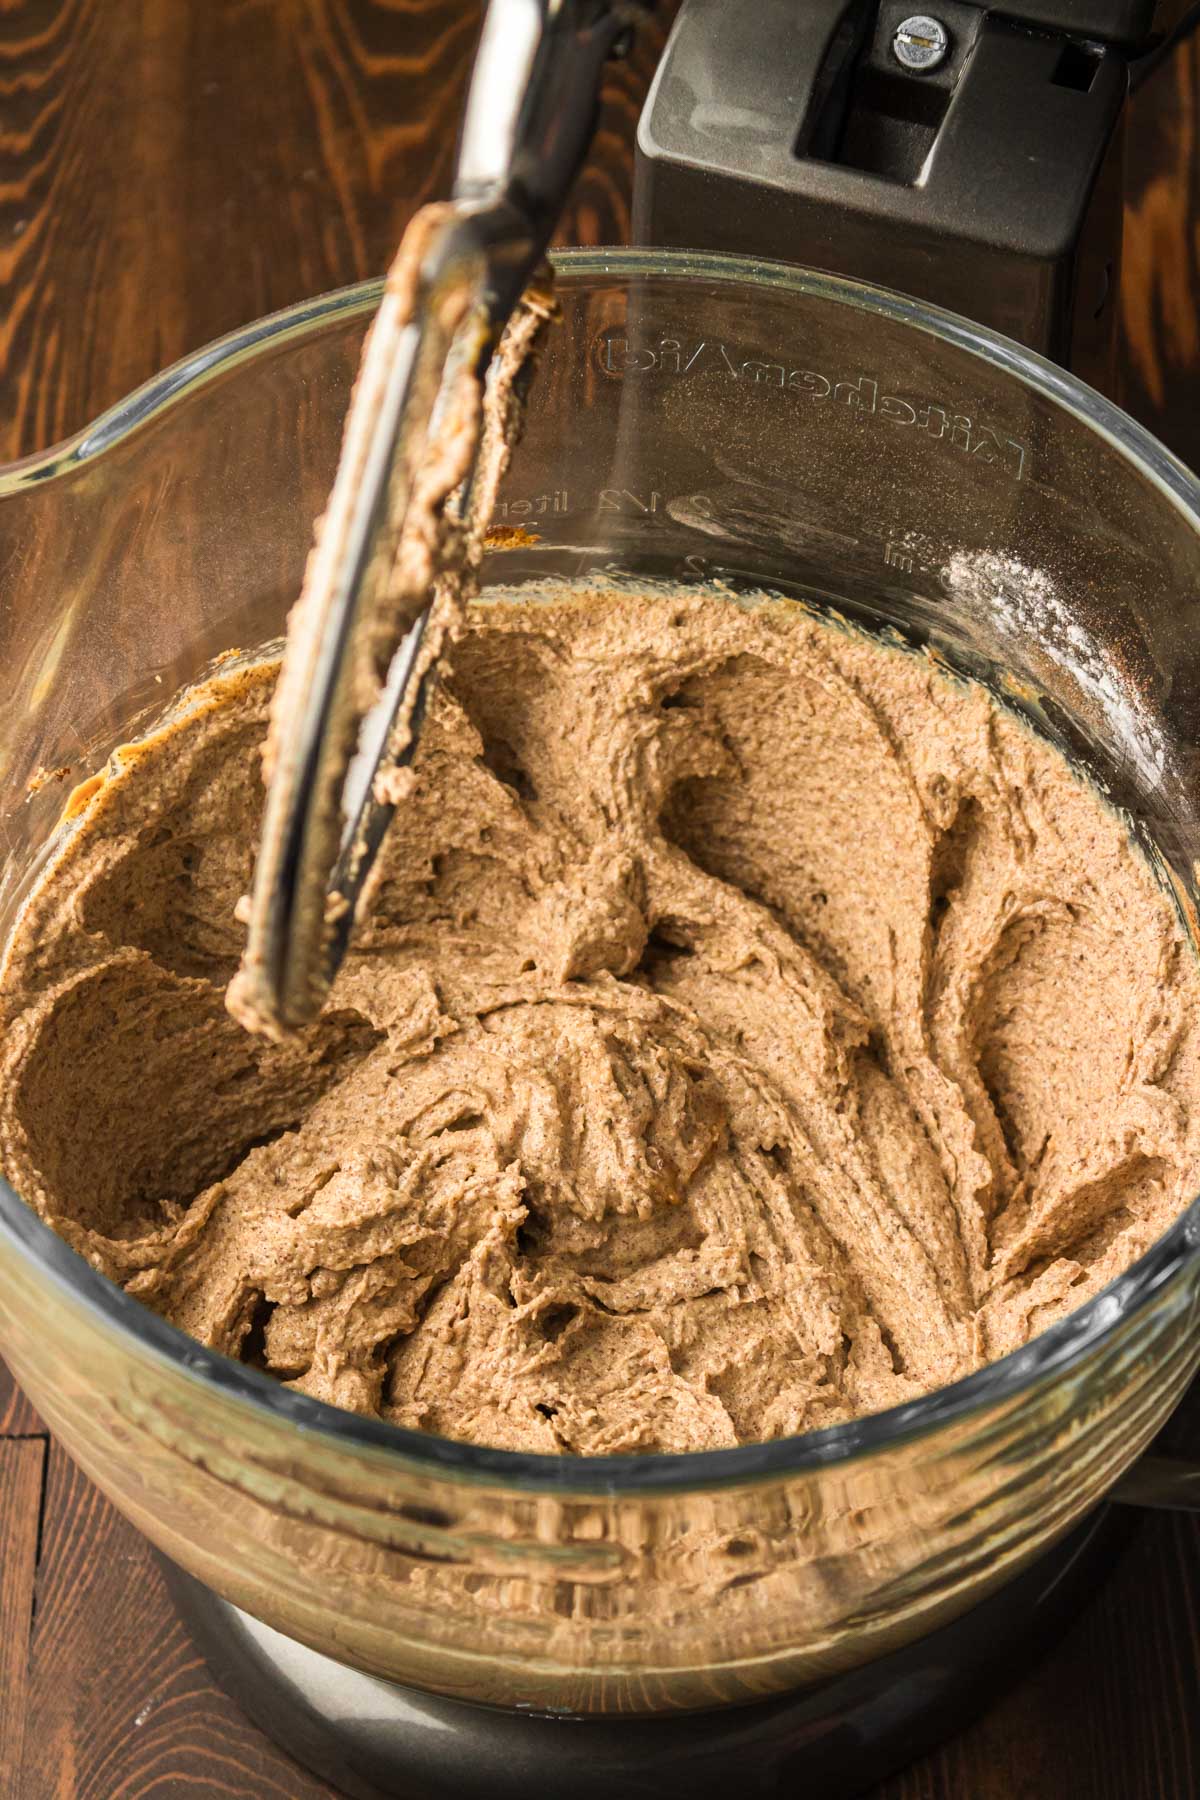 Peanut Butter cookie dough being made in a stand mixer.